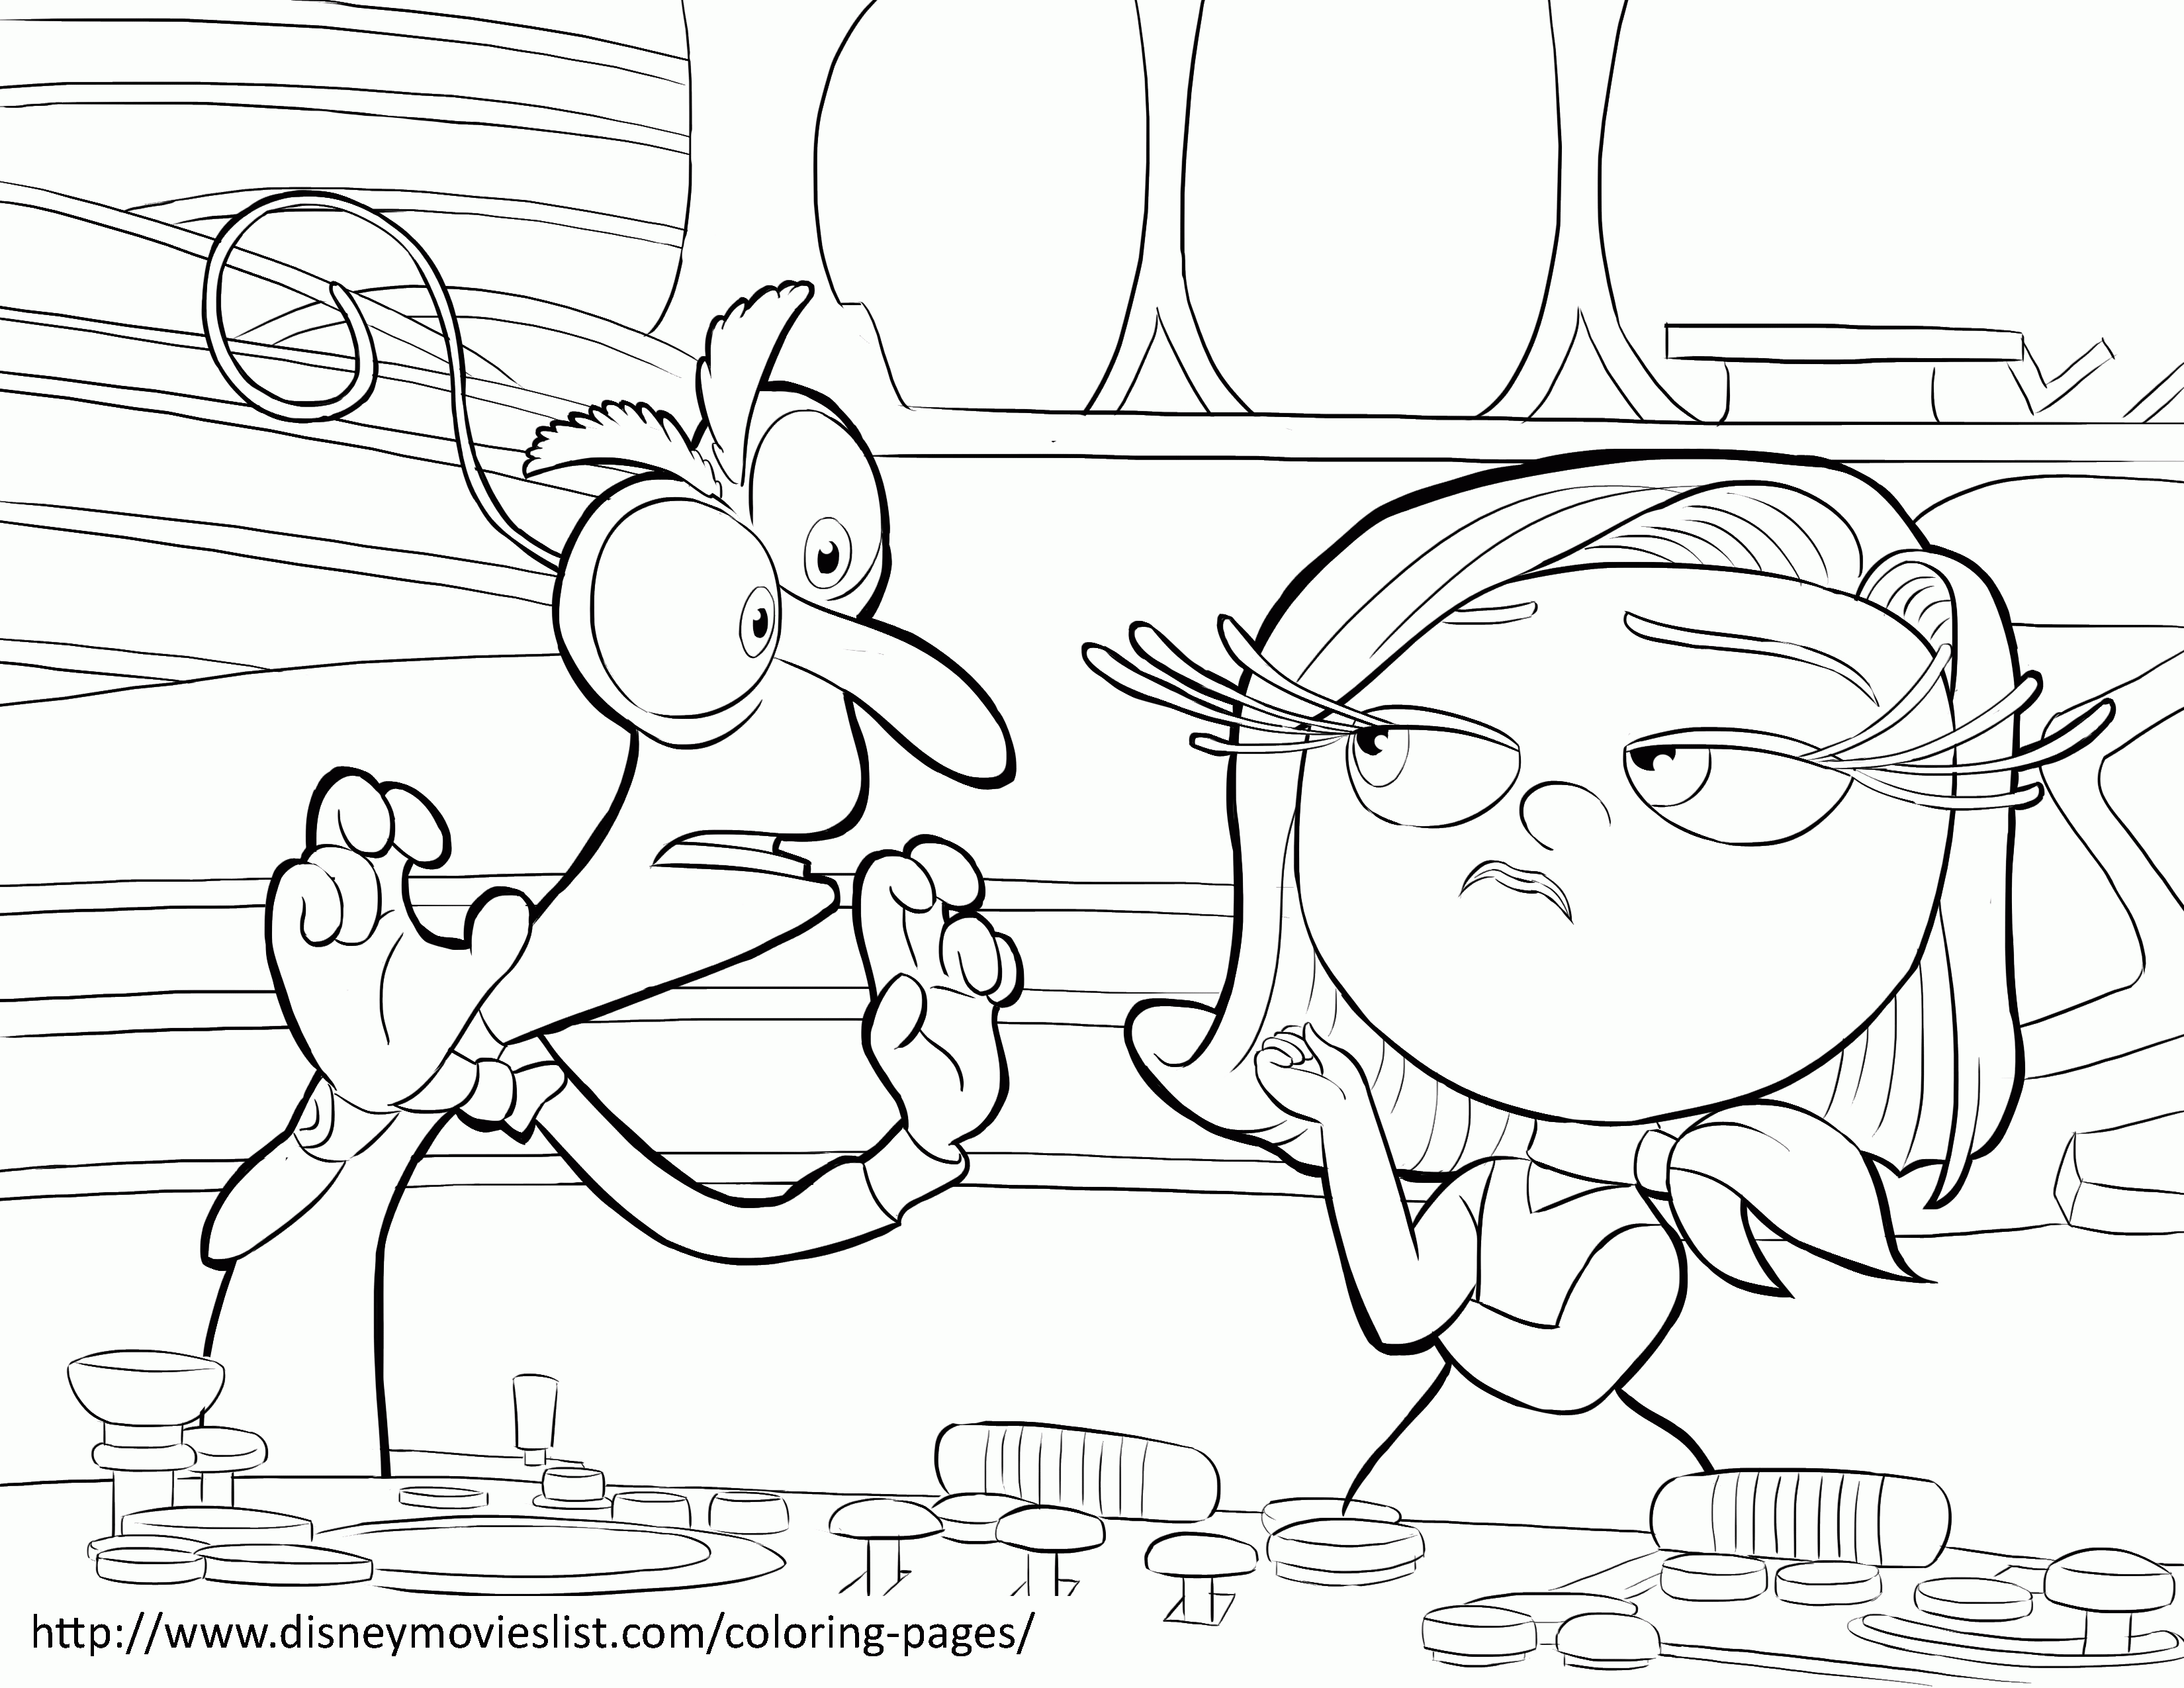 Fear and Disgust - Disney's Inside Out Coloring Page